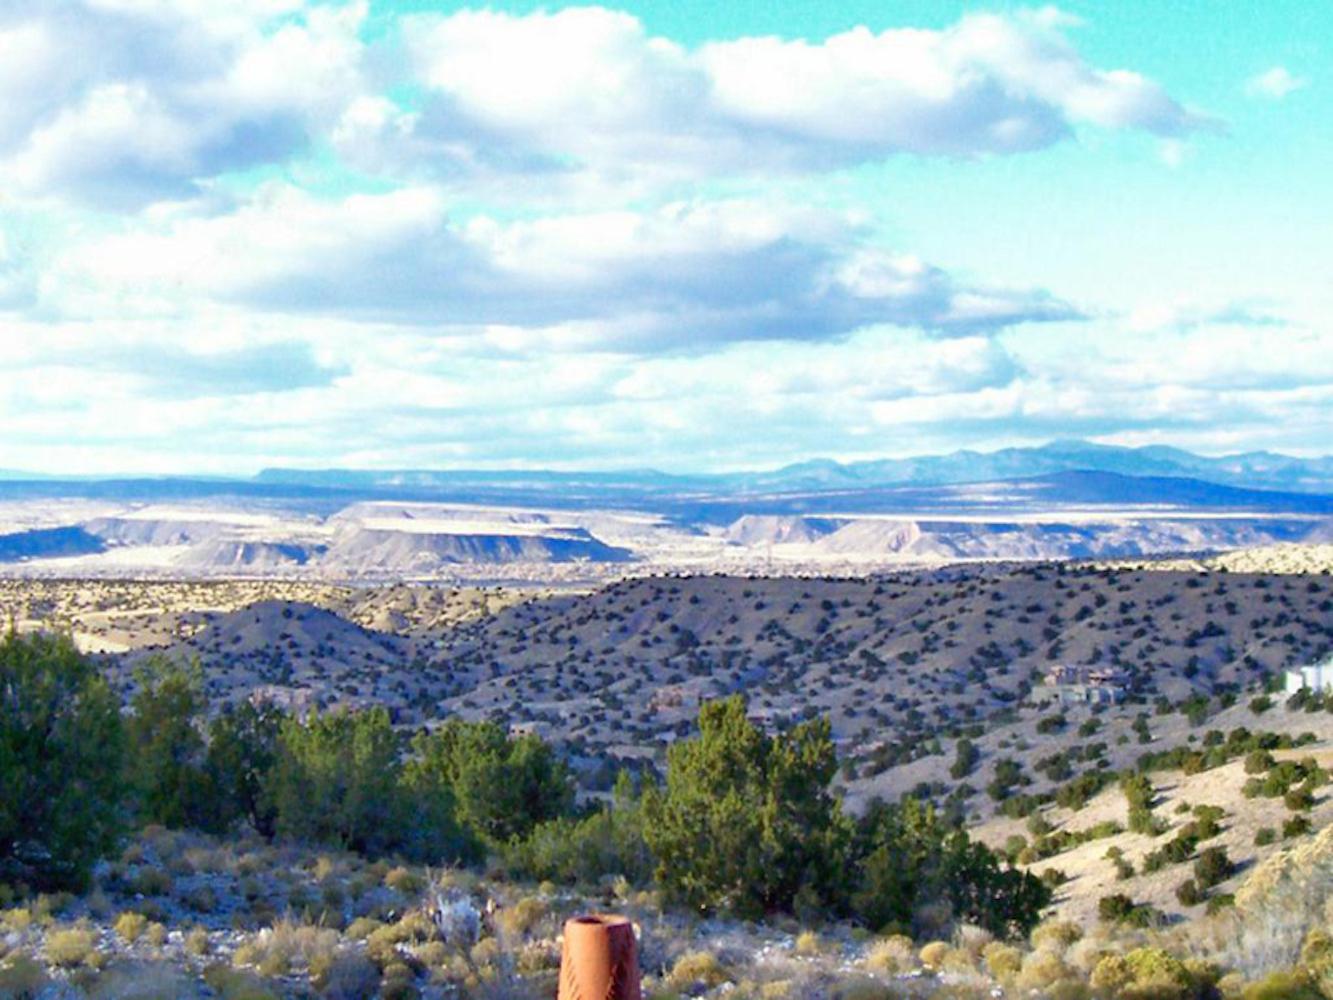 FINANCE your Investment: 20 Lots in New Mexico near Facebook's New Data Center!